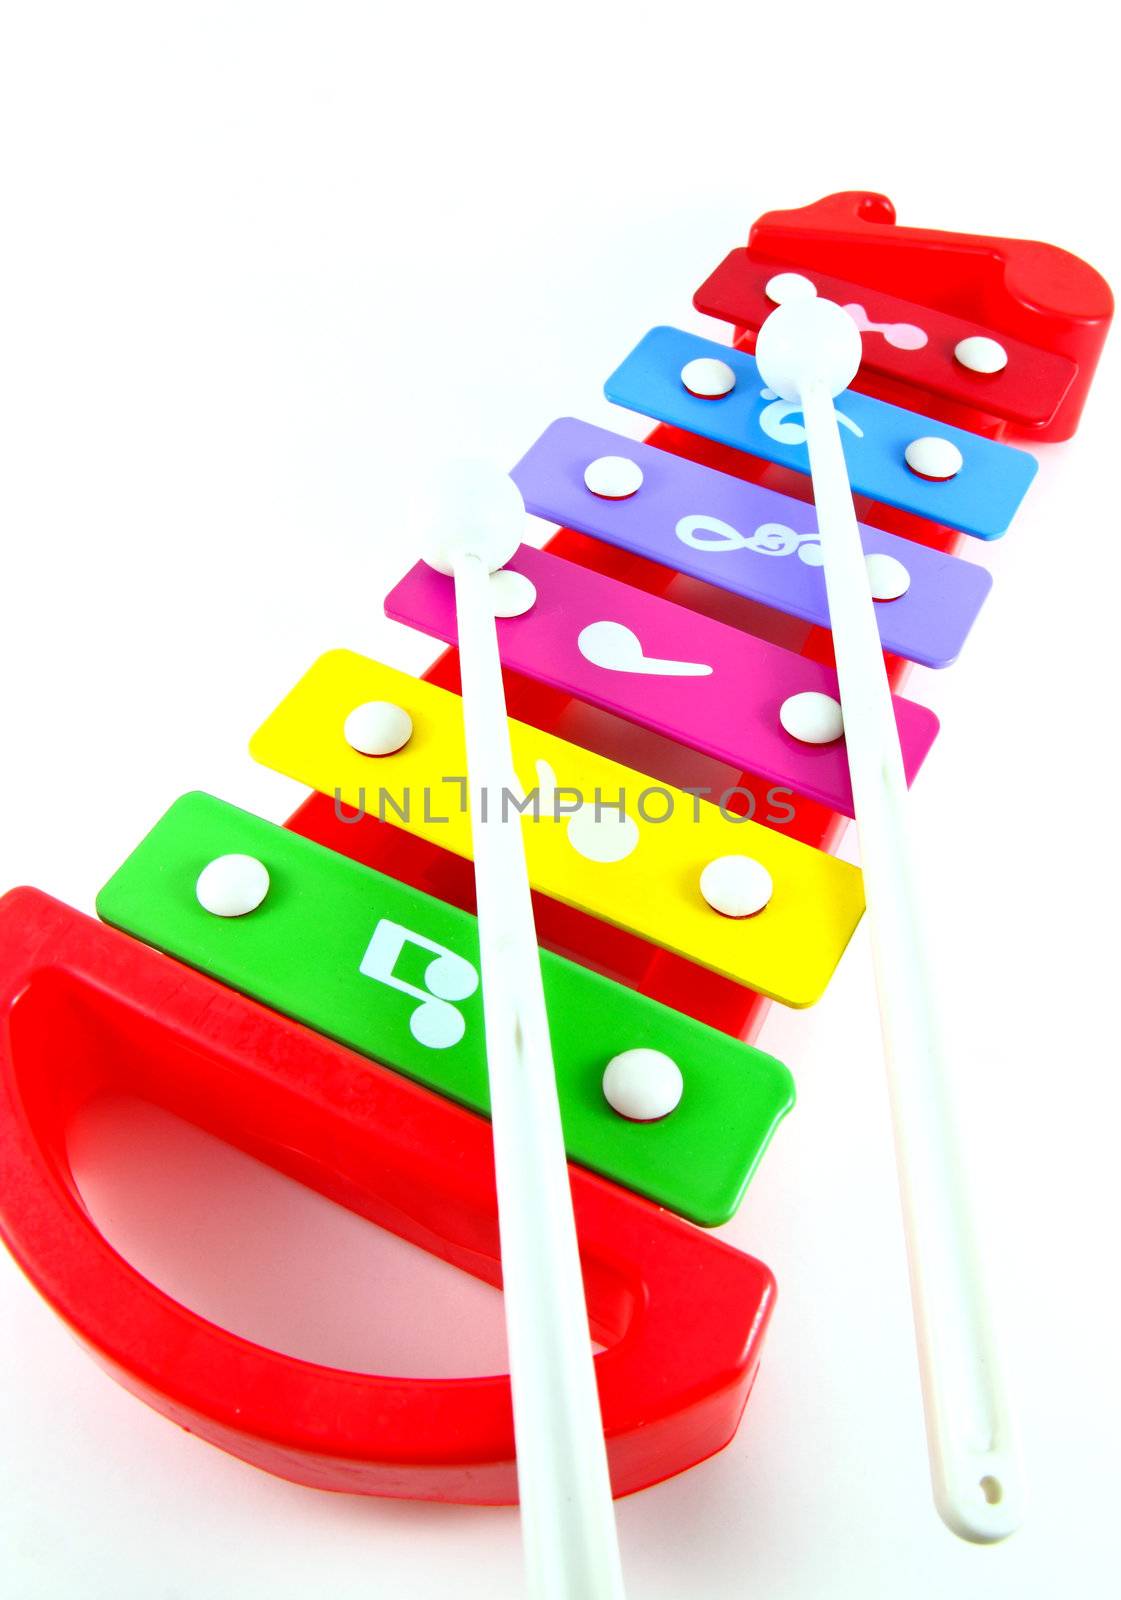 Toy colorful xylophone by nuchylee